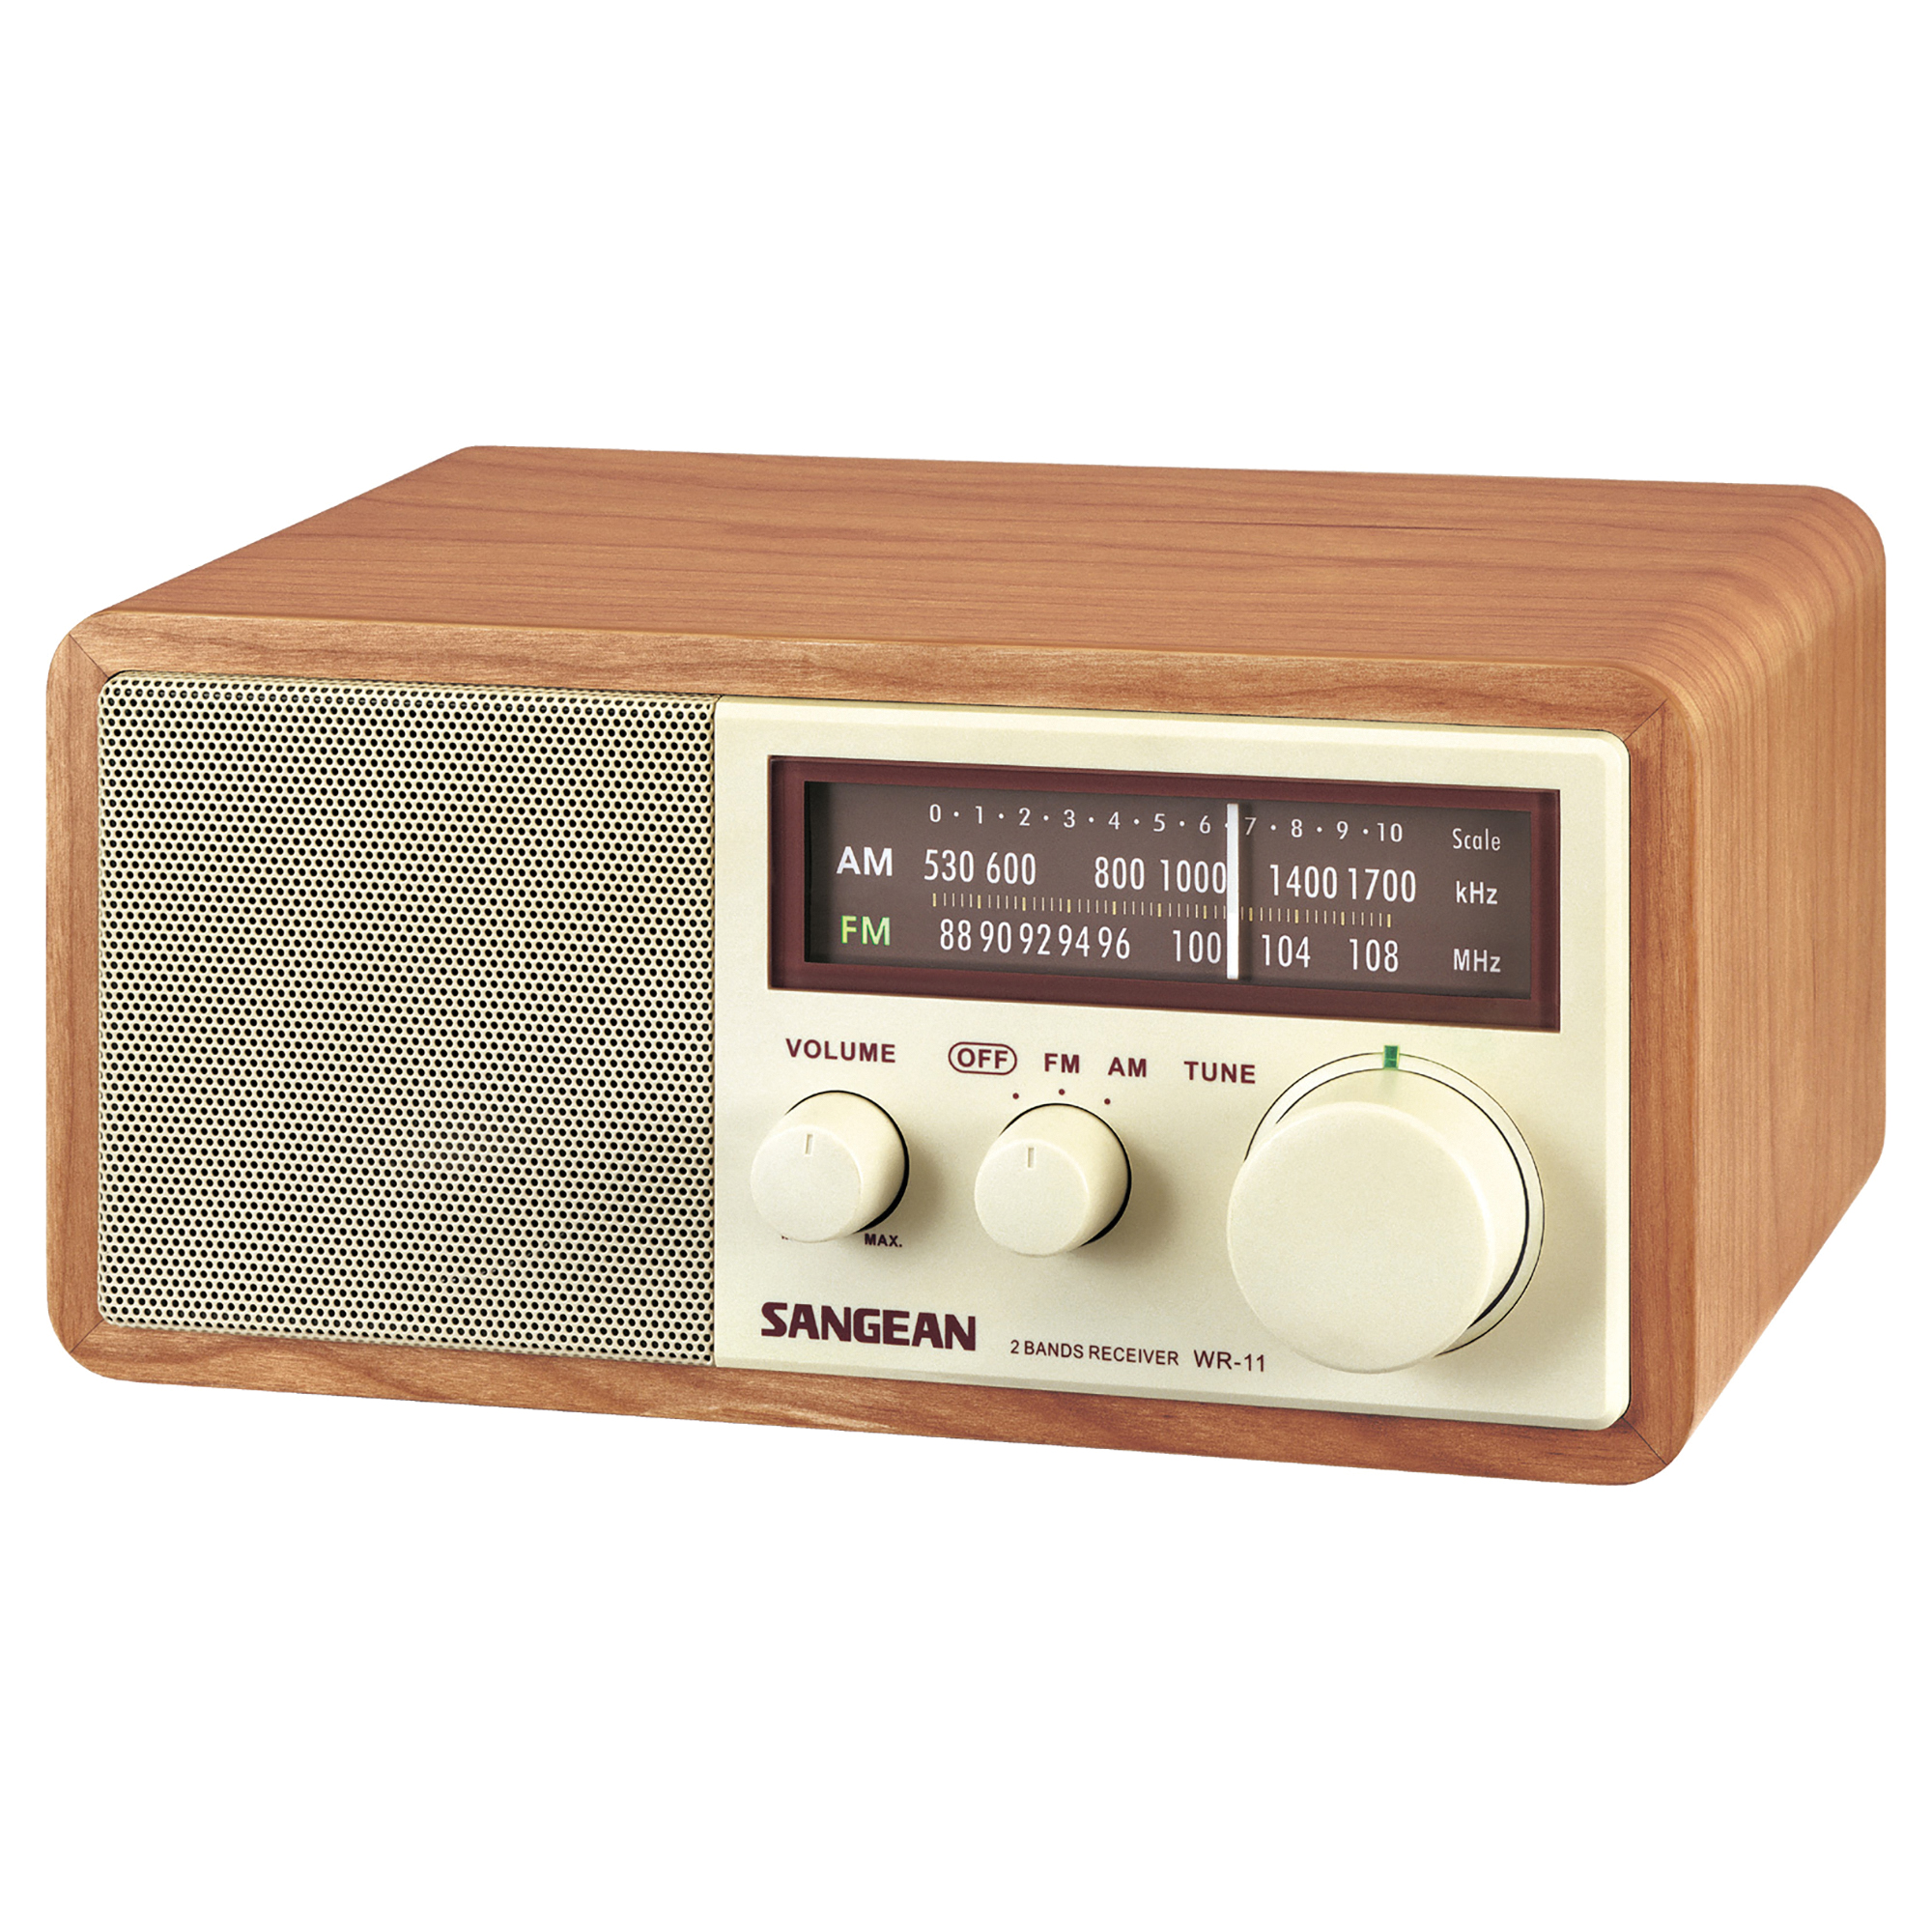 Sangean AM FM Aux Wooden Cabinet Table Top Radio with AUX Input - image 3 of 4